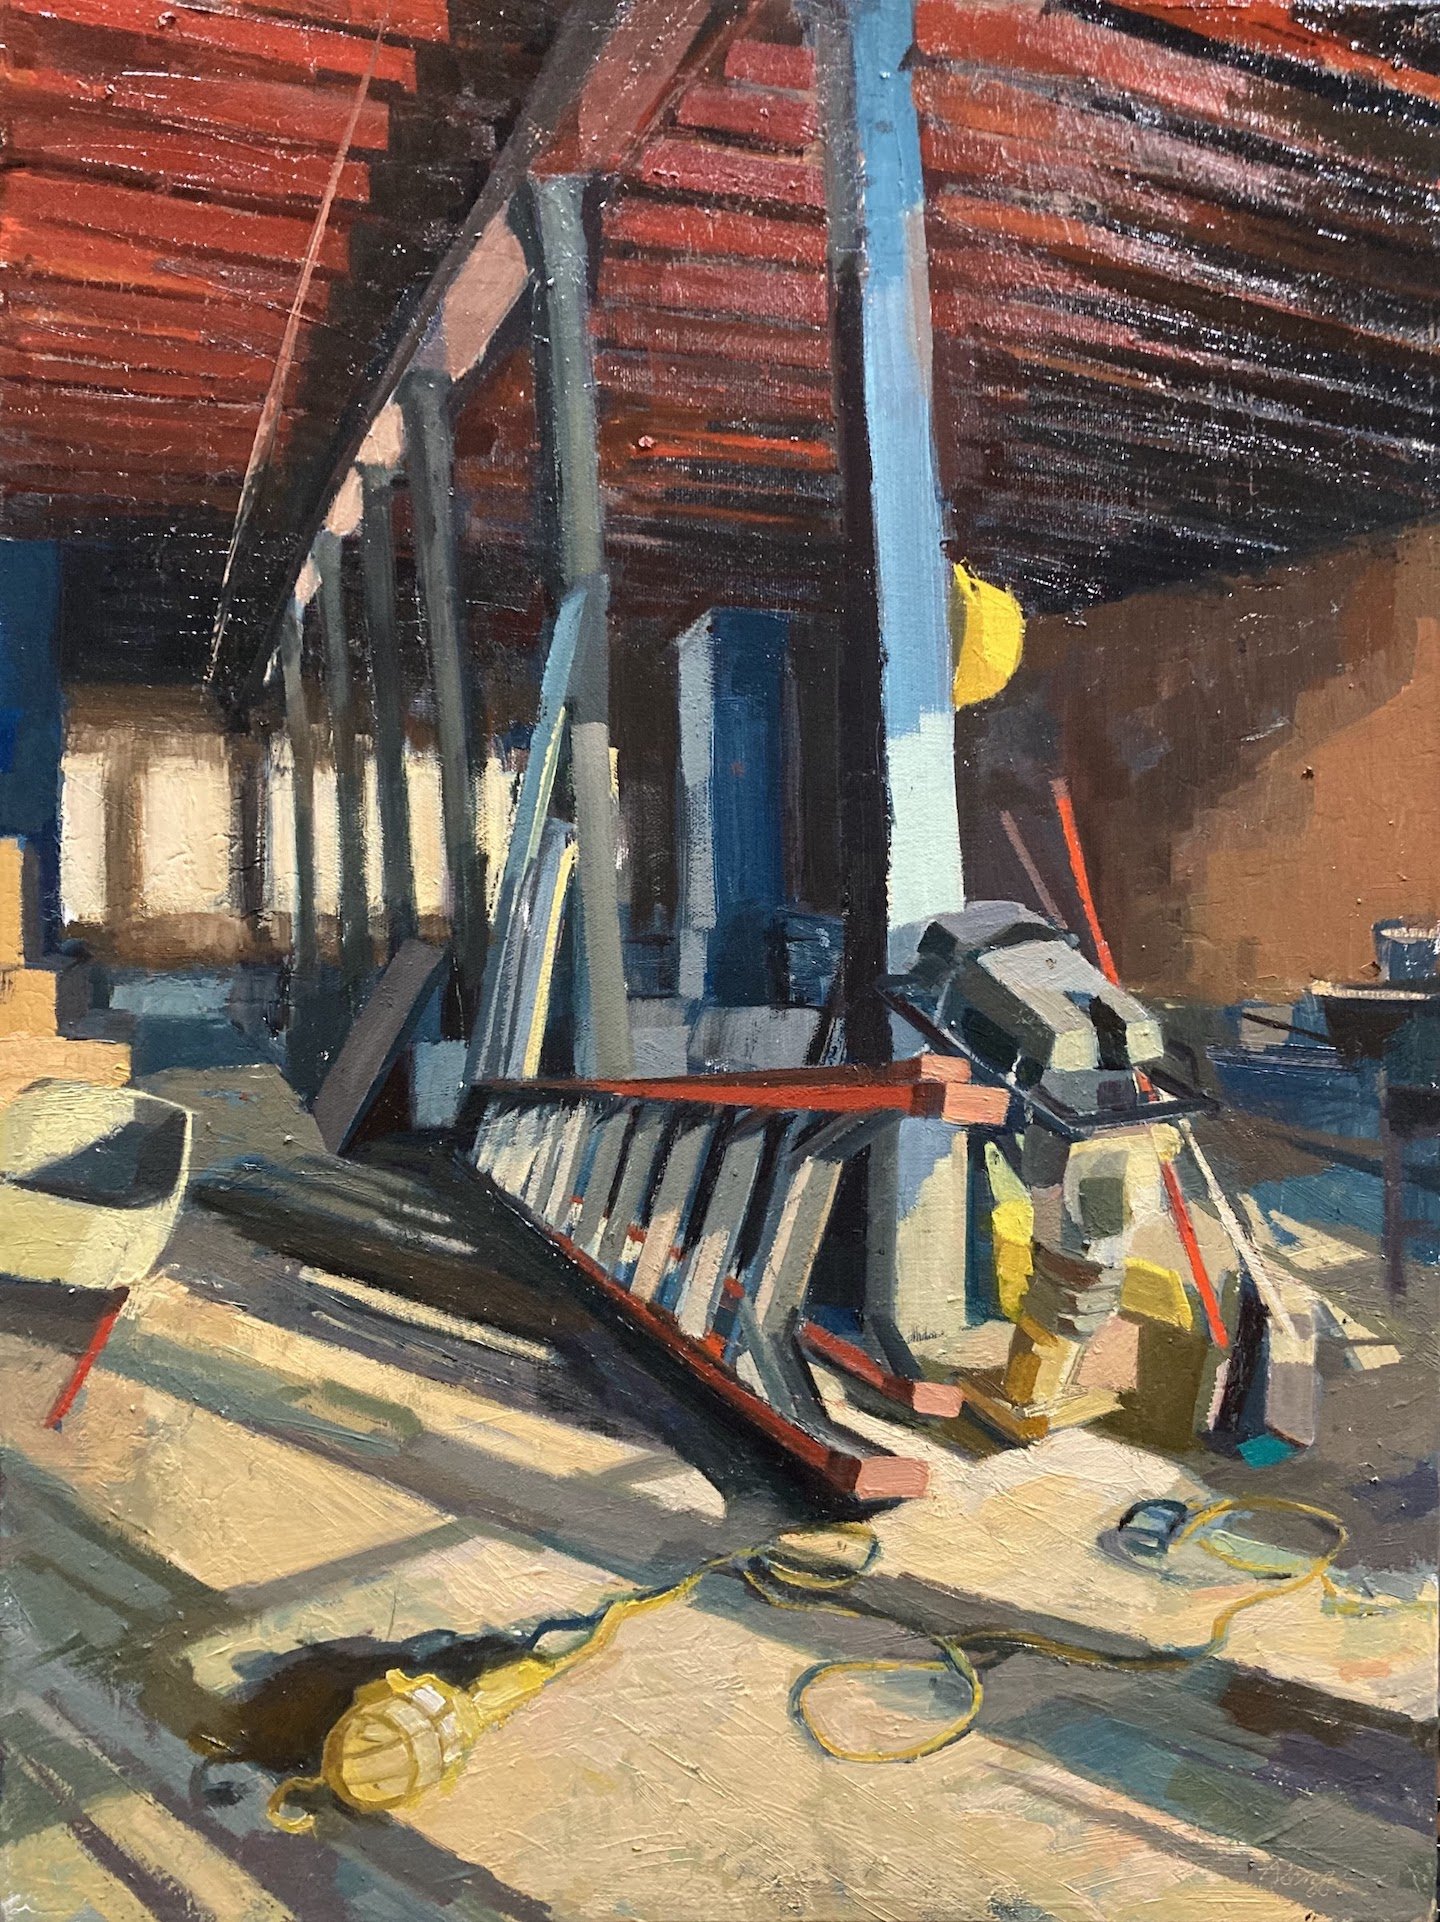    Sunset on the Job Site  , 24” x 18”, oil on canvas 